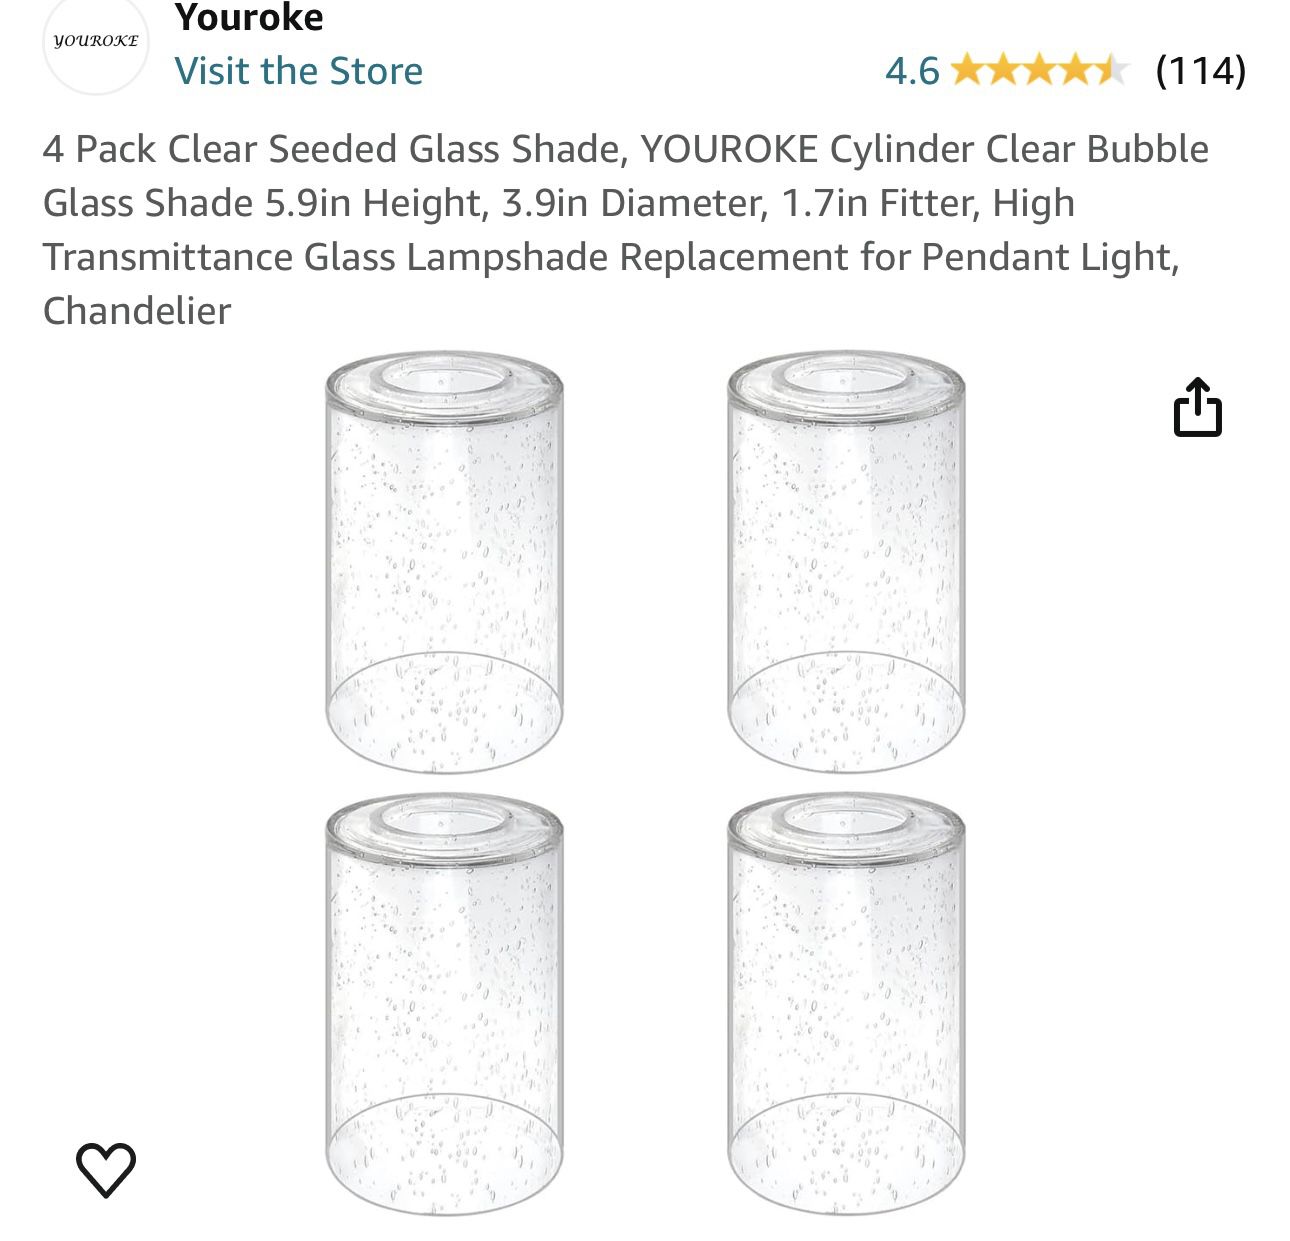 4 Pack Clear Seeded Glass Shade, YOUROKE Cylinder Clear Bubble Glass Shade 5.9in Height, 3.9in Diameter, 1.7in Fitter, High Transmittance Glass Lampsh